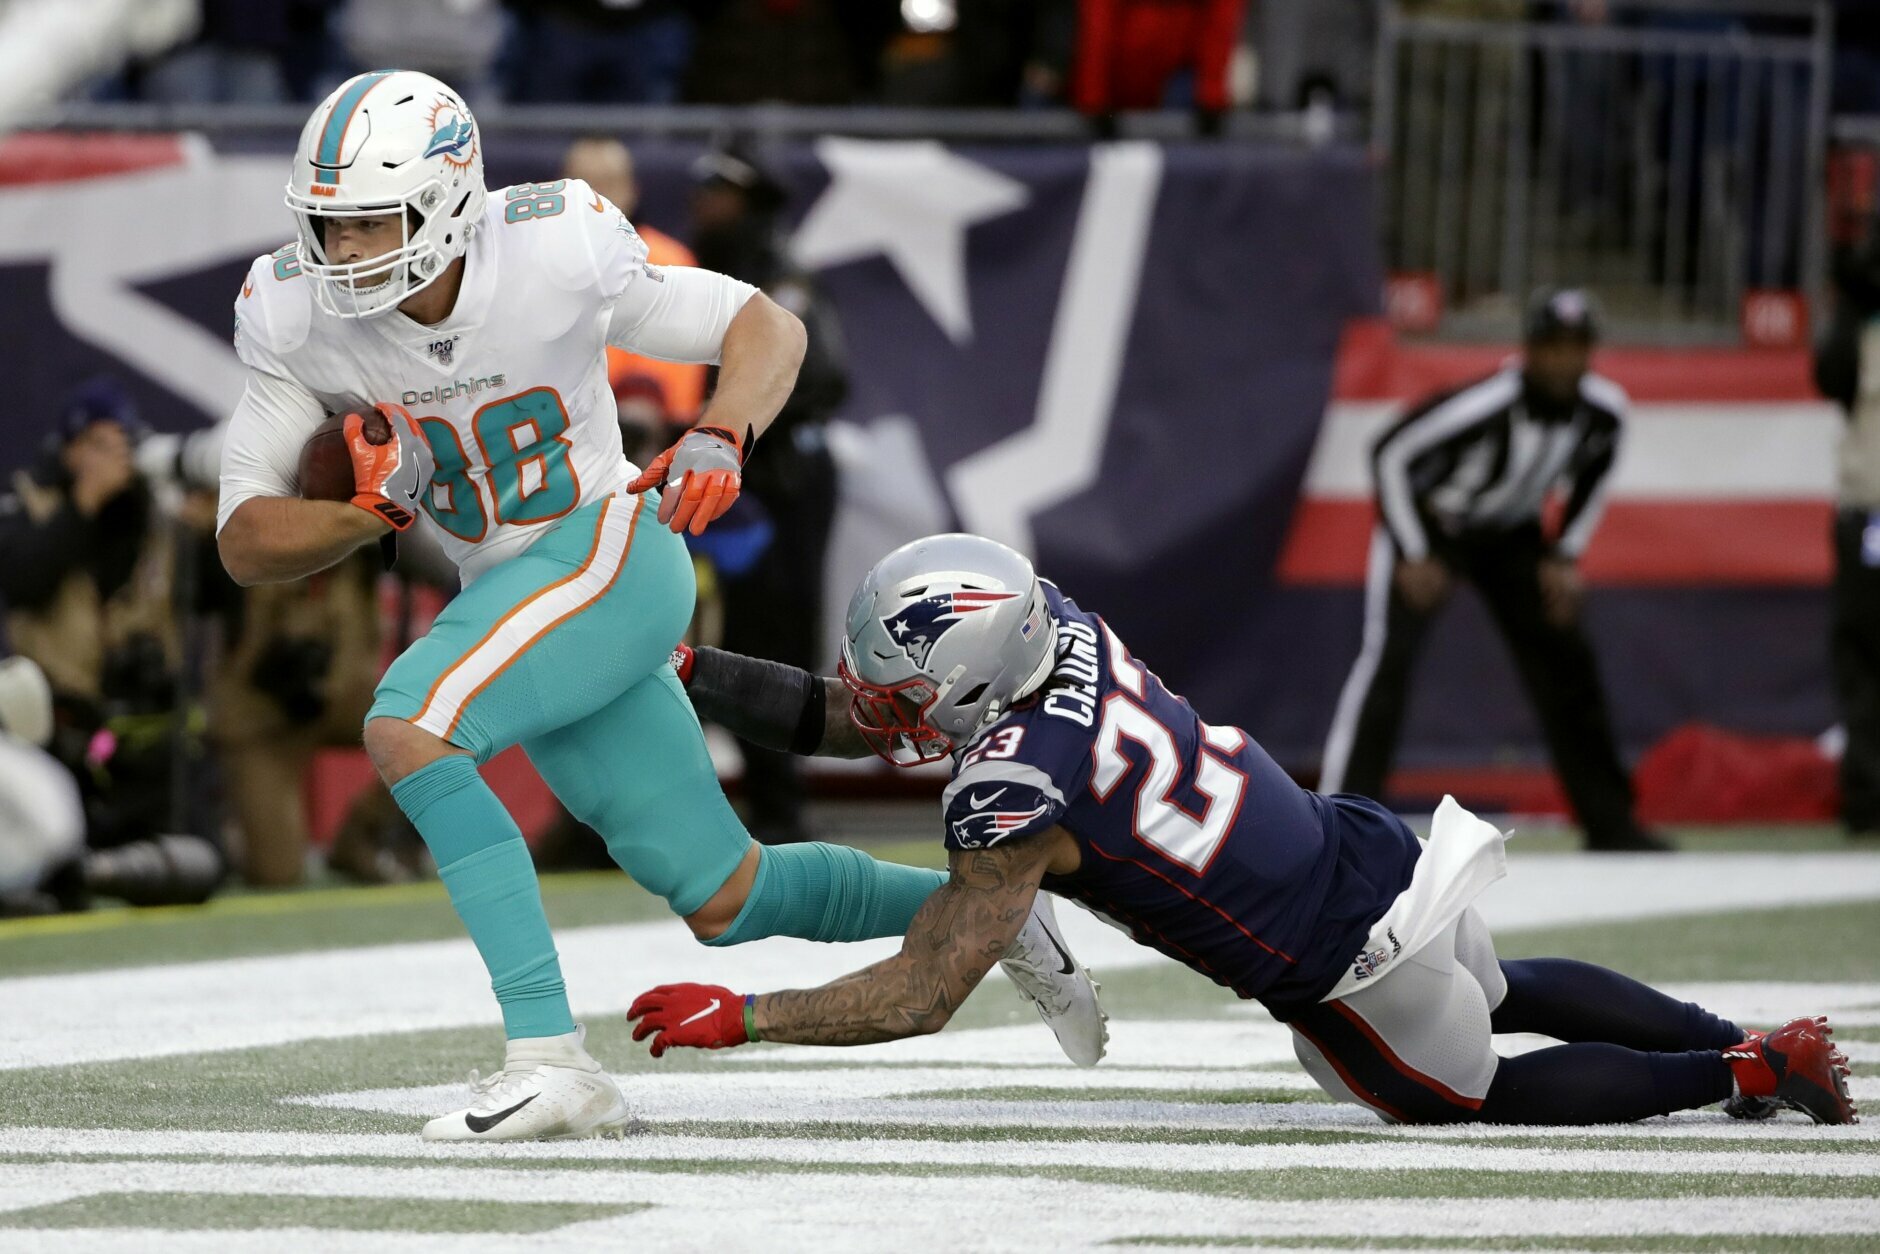 <p><b><i>Dolphins 27</i></b><br />
<b><i>Patriots 24</i></b></p>
<p>Miami&#8217;s first win in New England in 11 years, and their 5-4 finish after a historically bad 0-7 start, suggests the Dolphins are on the right track. If they make the most of their draft bounty in 2020 — they have three first-round picks, a pair of second-rounders and at least 10 picks in total — this could eventually become the new king of the AFC East.</p>
<p>But the actual Patriots find themselves in an unfamiliar position: A wild card team for the first time since 2009 and questions surrounding whether Tom Brady — who <a href="https://profootballtalk.nbcsports.com/2019/12/28/tom-brady-caps-a-historic-season-on-sunday/" target="_blank" rel="noopener">made NFL history by just being on the field</a> for all 16 games — has enough left in the tank to take New England the long way back to the Super Bowl. With former Patriot Mike Vrabel returning to Foxborough with a tough Titans team on a roll, the Pats are in danger of a rare one-and-done playoff run.</p>
